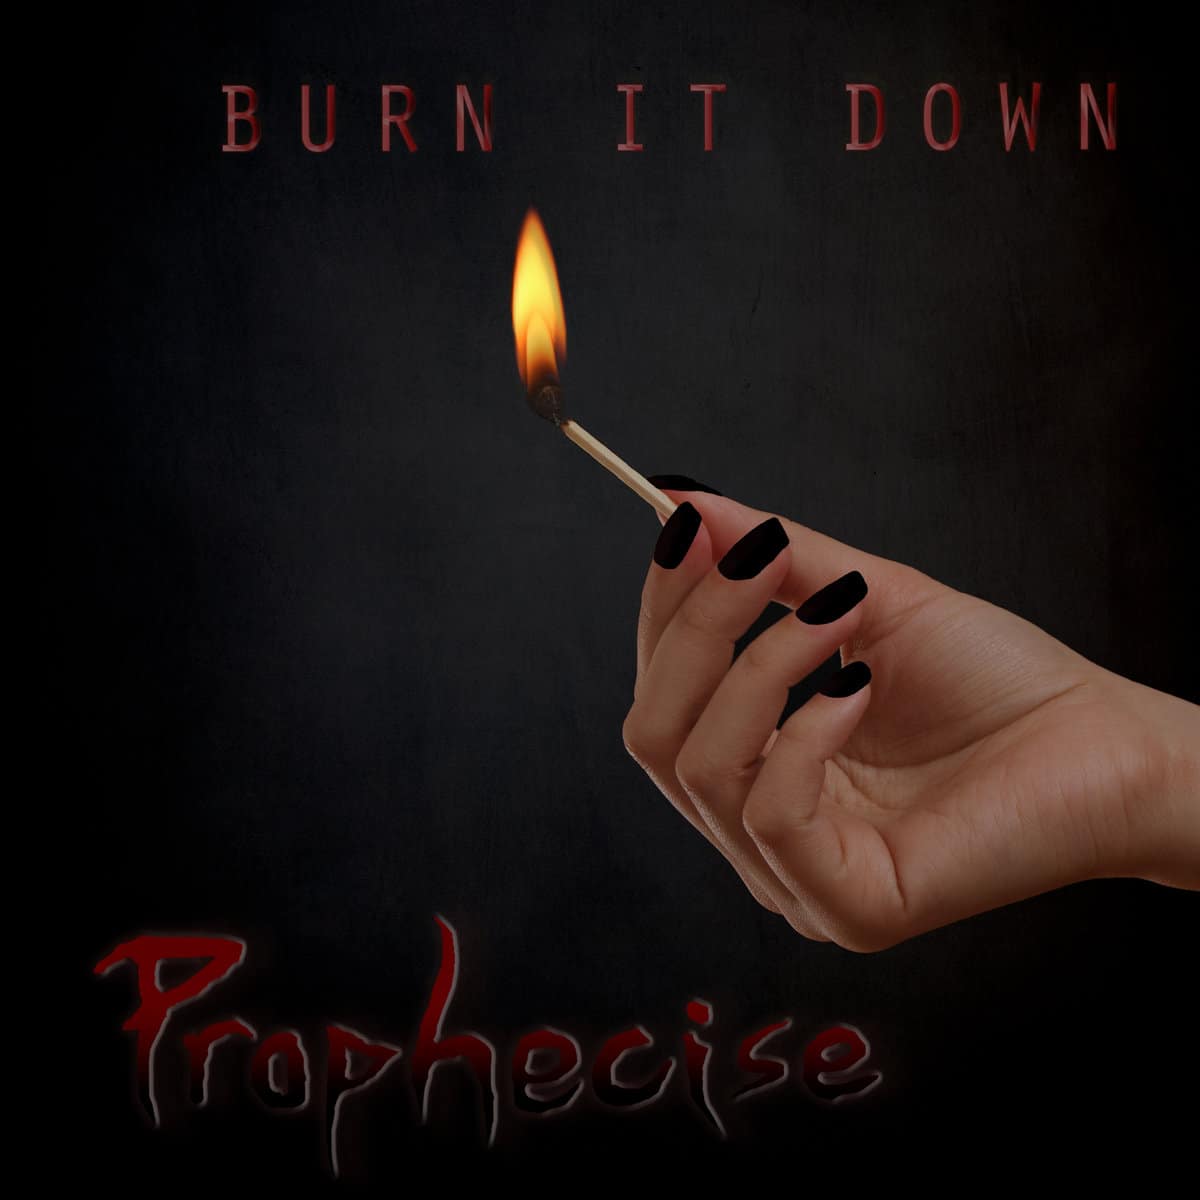 Cover art for Burn It Down by Prophecise. Full record & mix: Infidel Studios